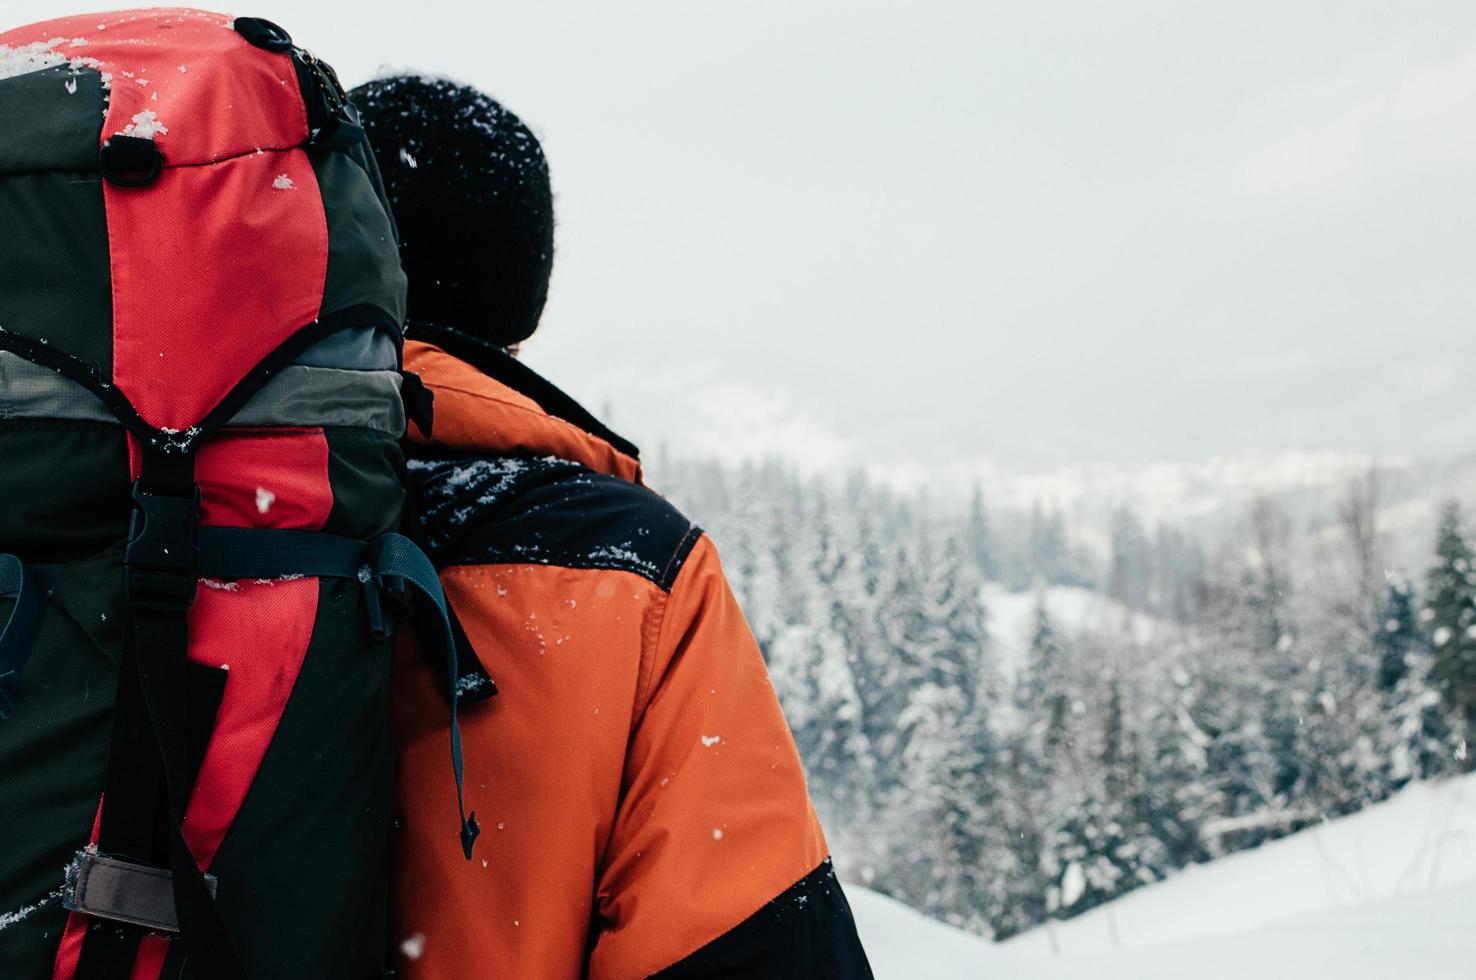 Rear view of tourist male enjoying mountain forest landscape on snowy winter day. Orange garment, red backpack. Hiking travel extreme lifestyle concept photo